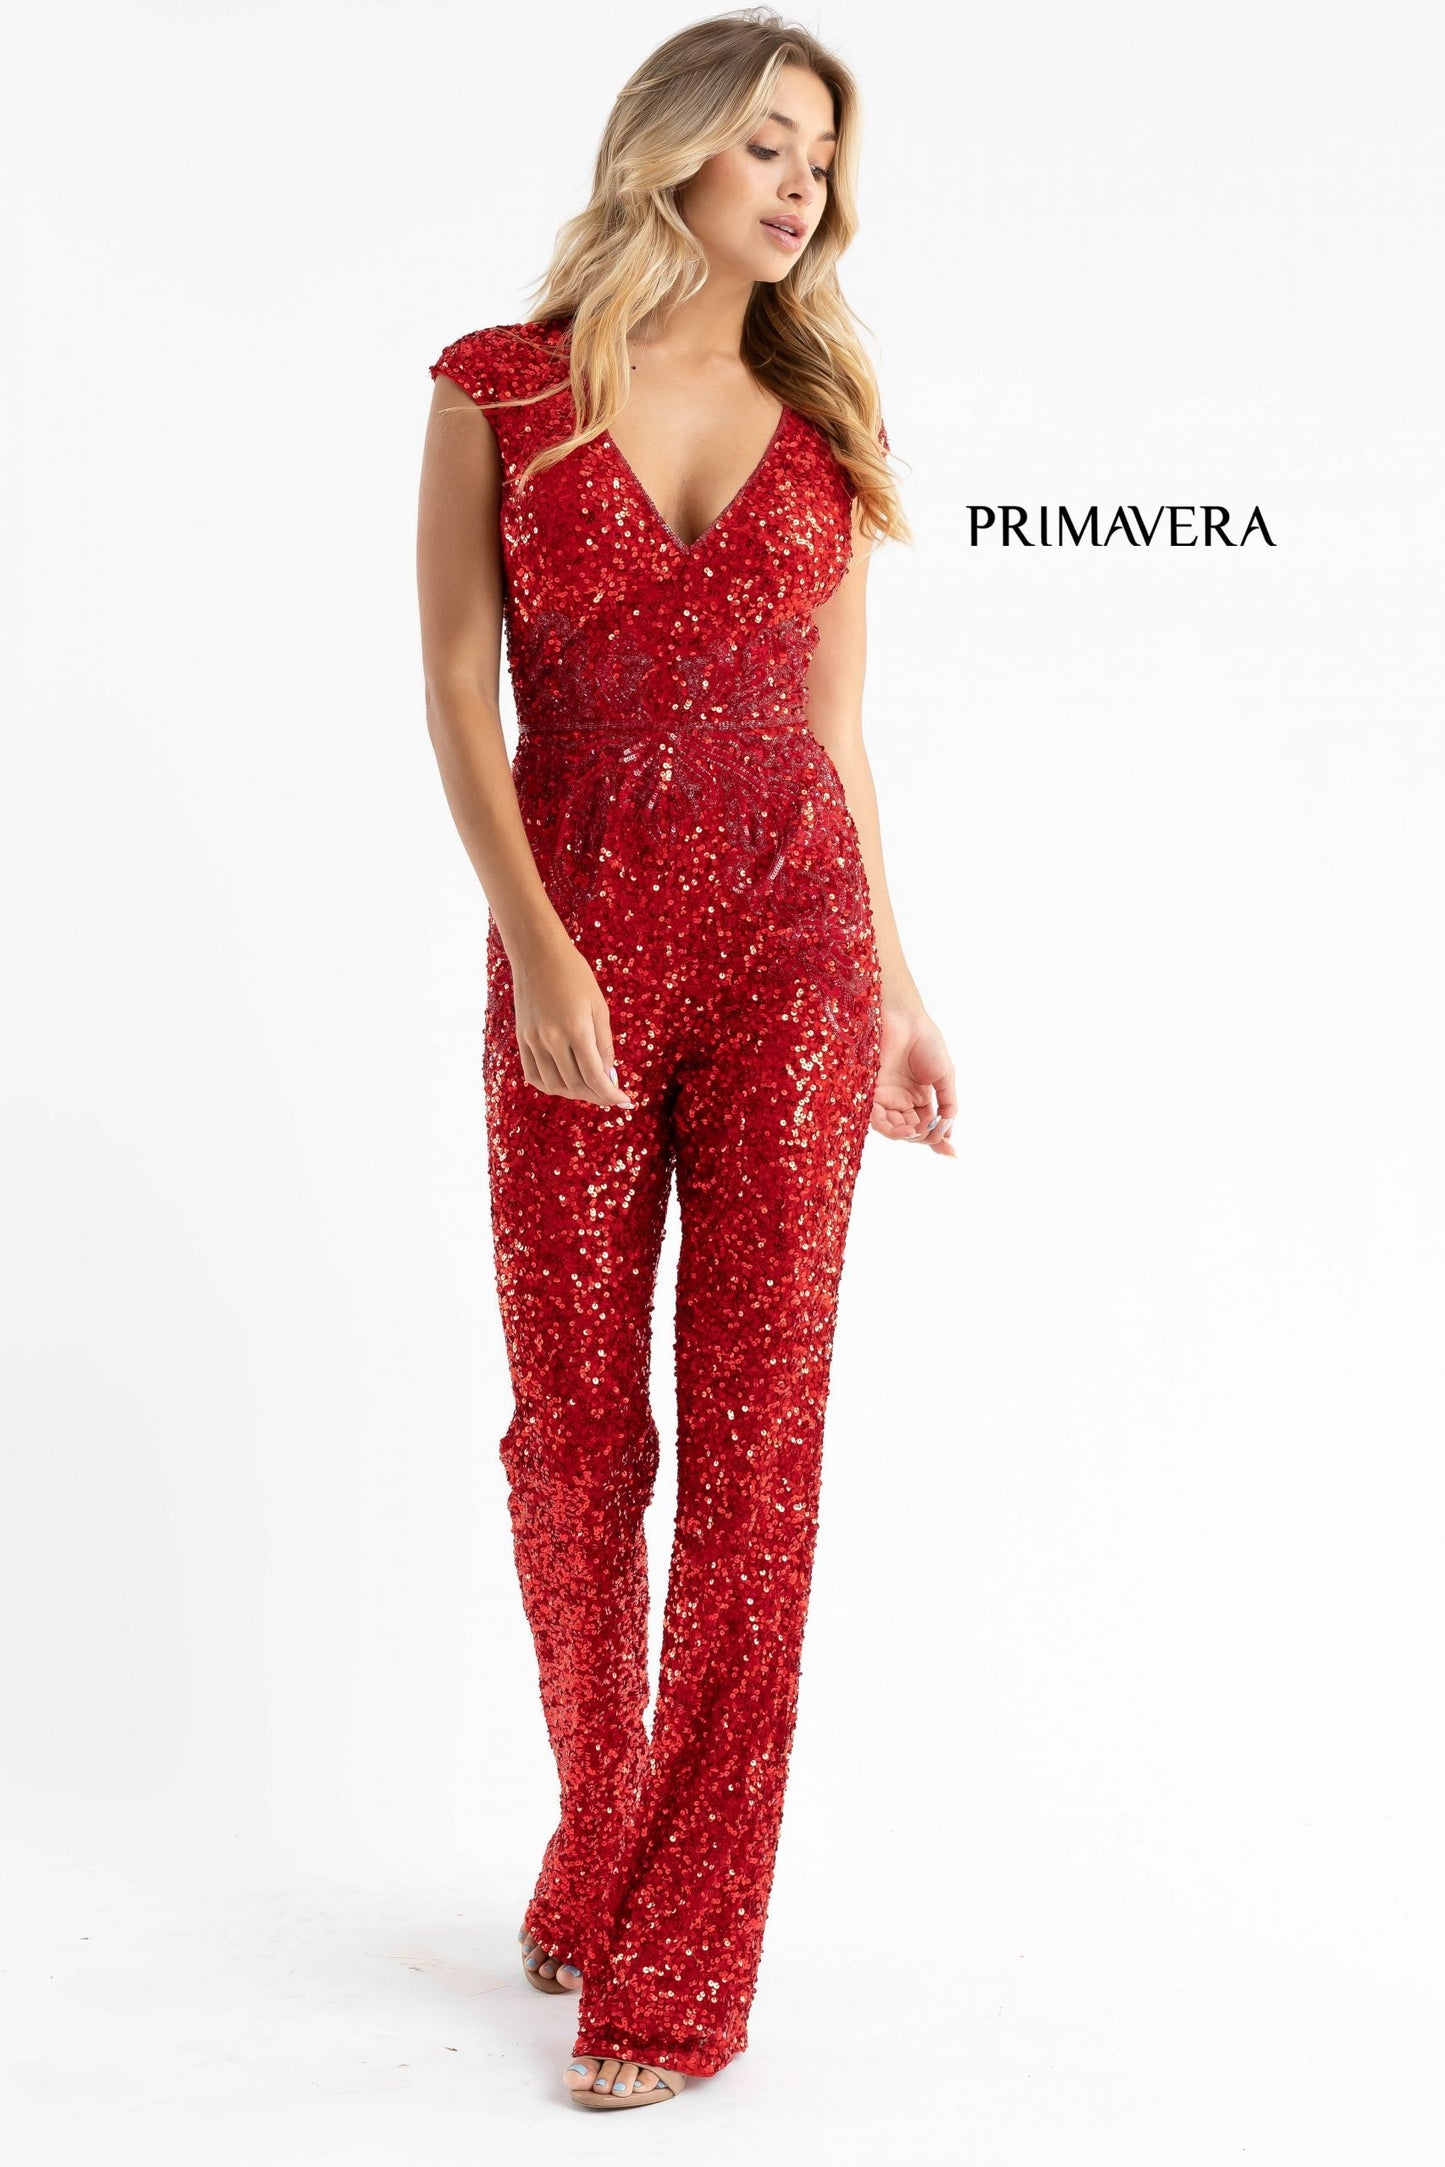 Primavera Couture 3775 Size 12 Turquoise Sequined Jumpsuit Beaded Waist and Hips Cap Sleeves